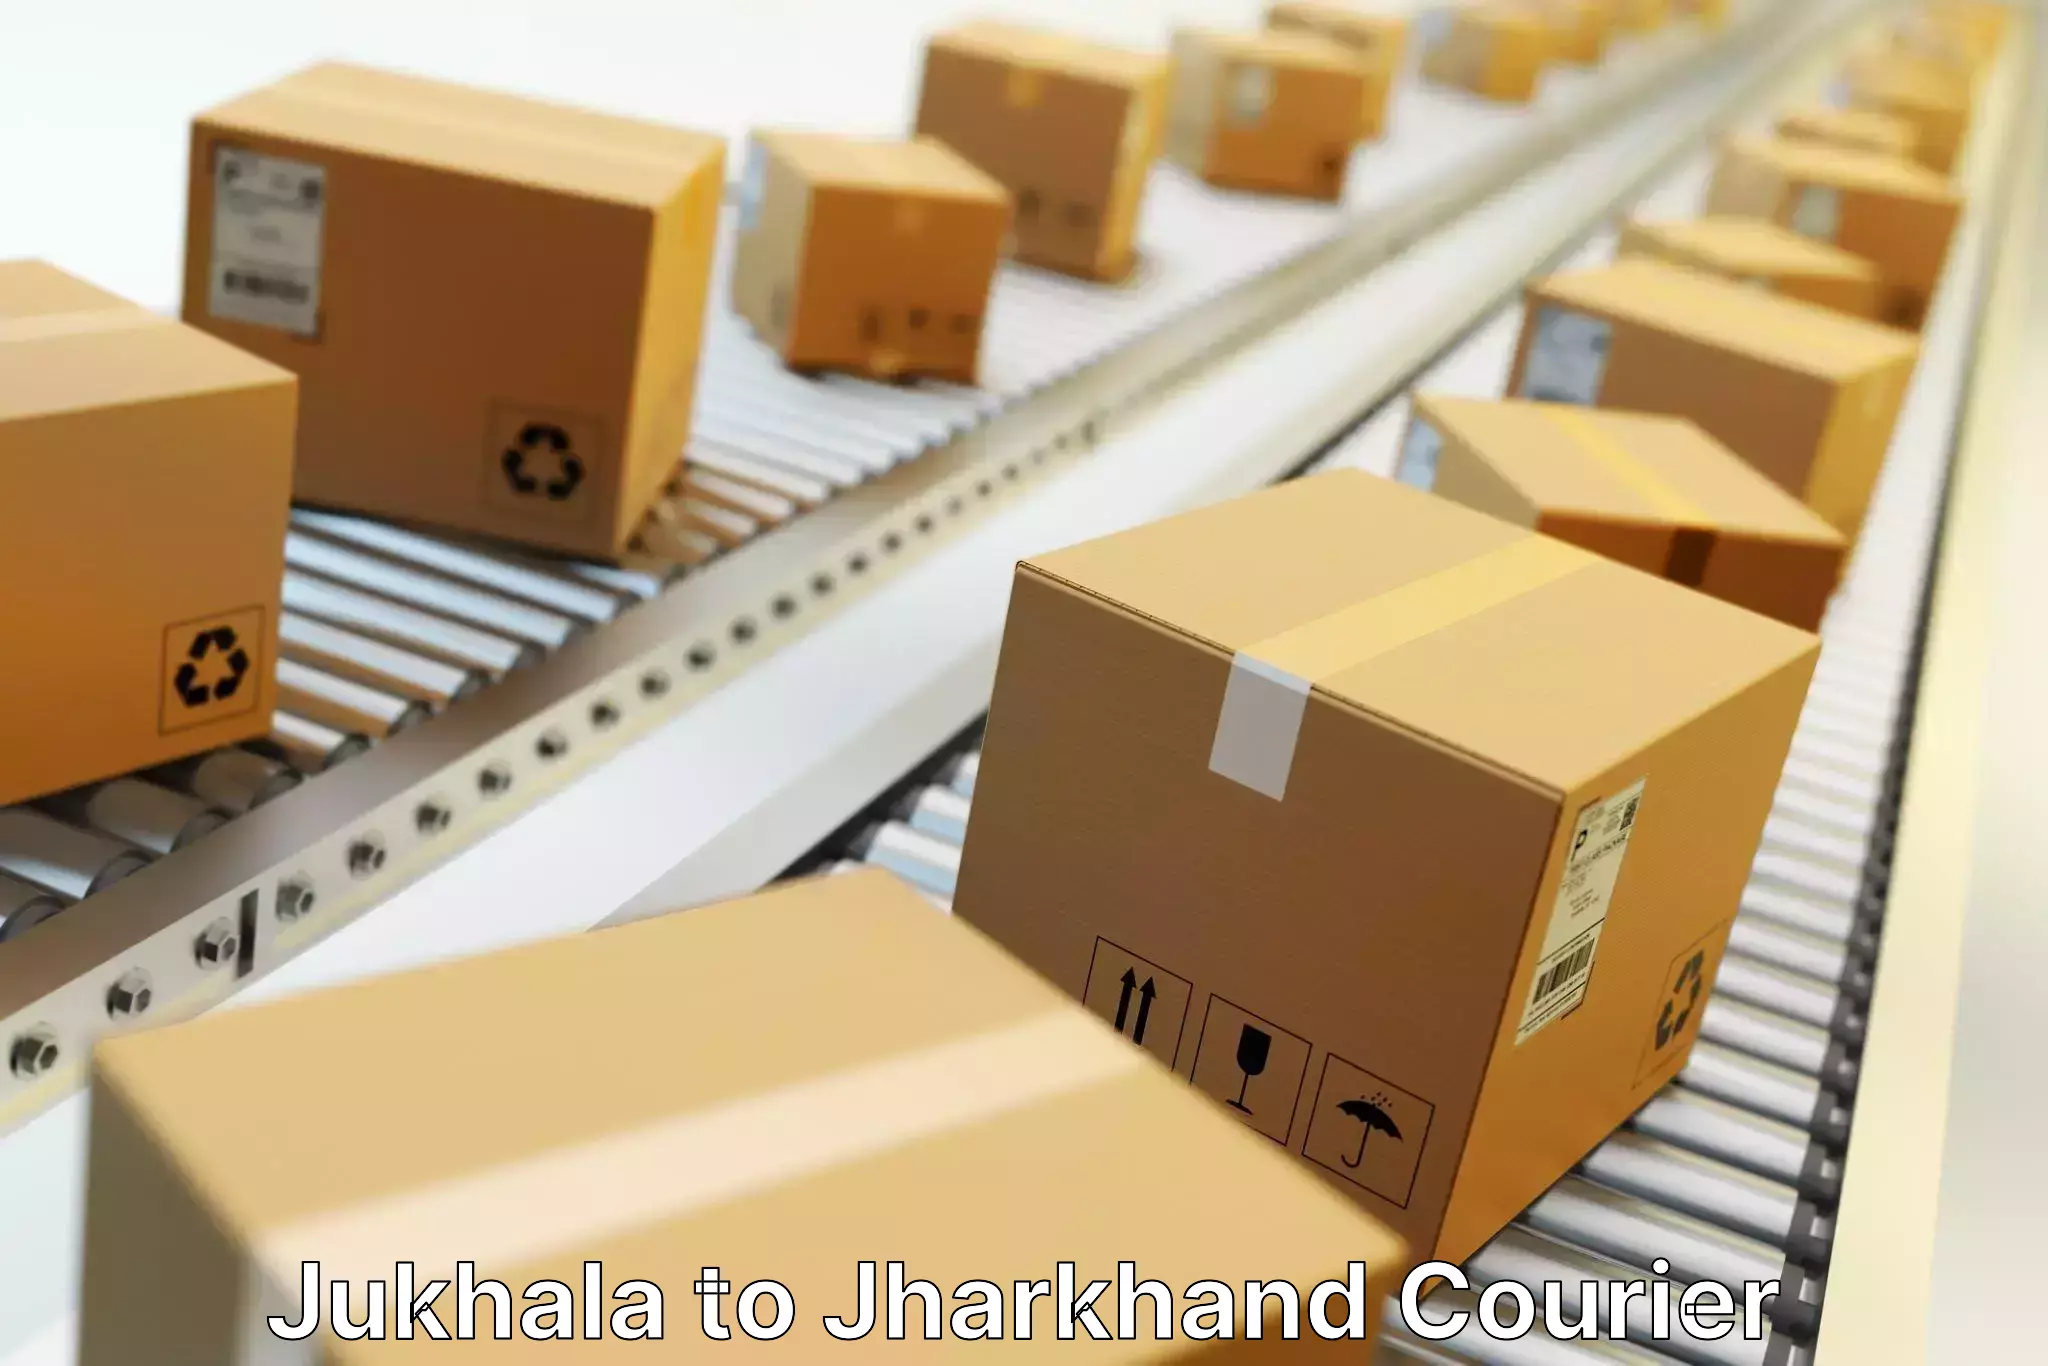 Supply chain delivery in Jukhala to IIT Dhanbad